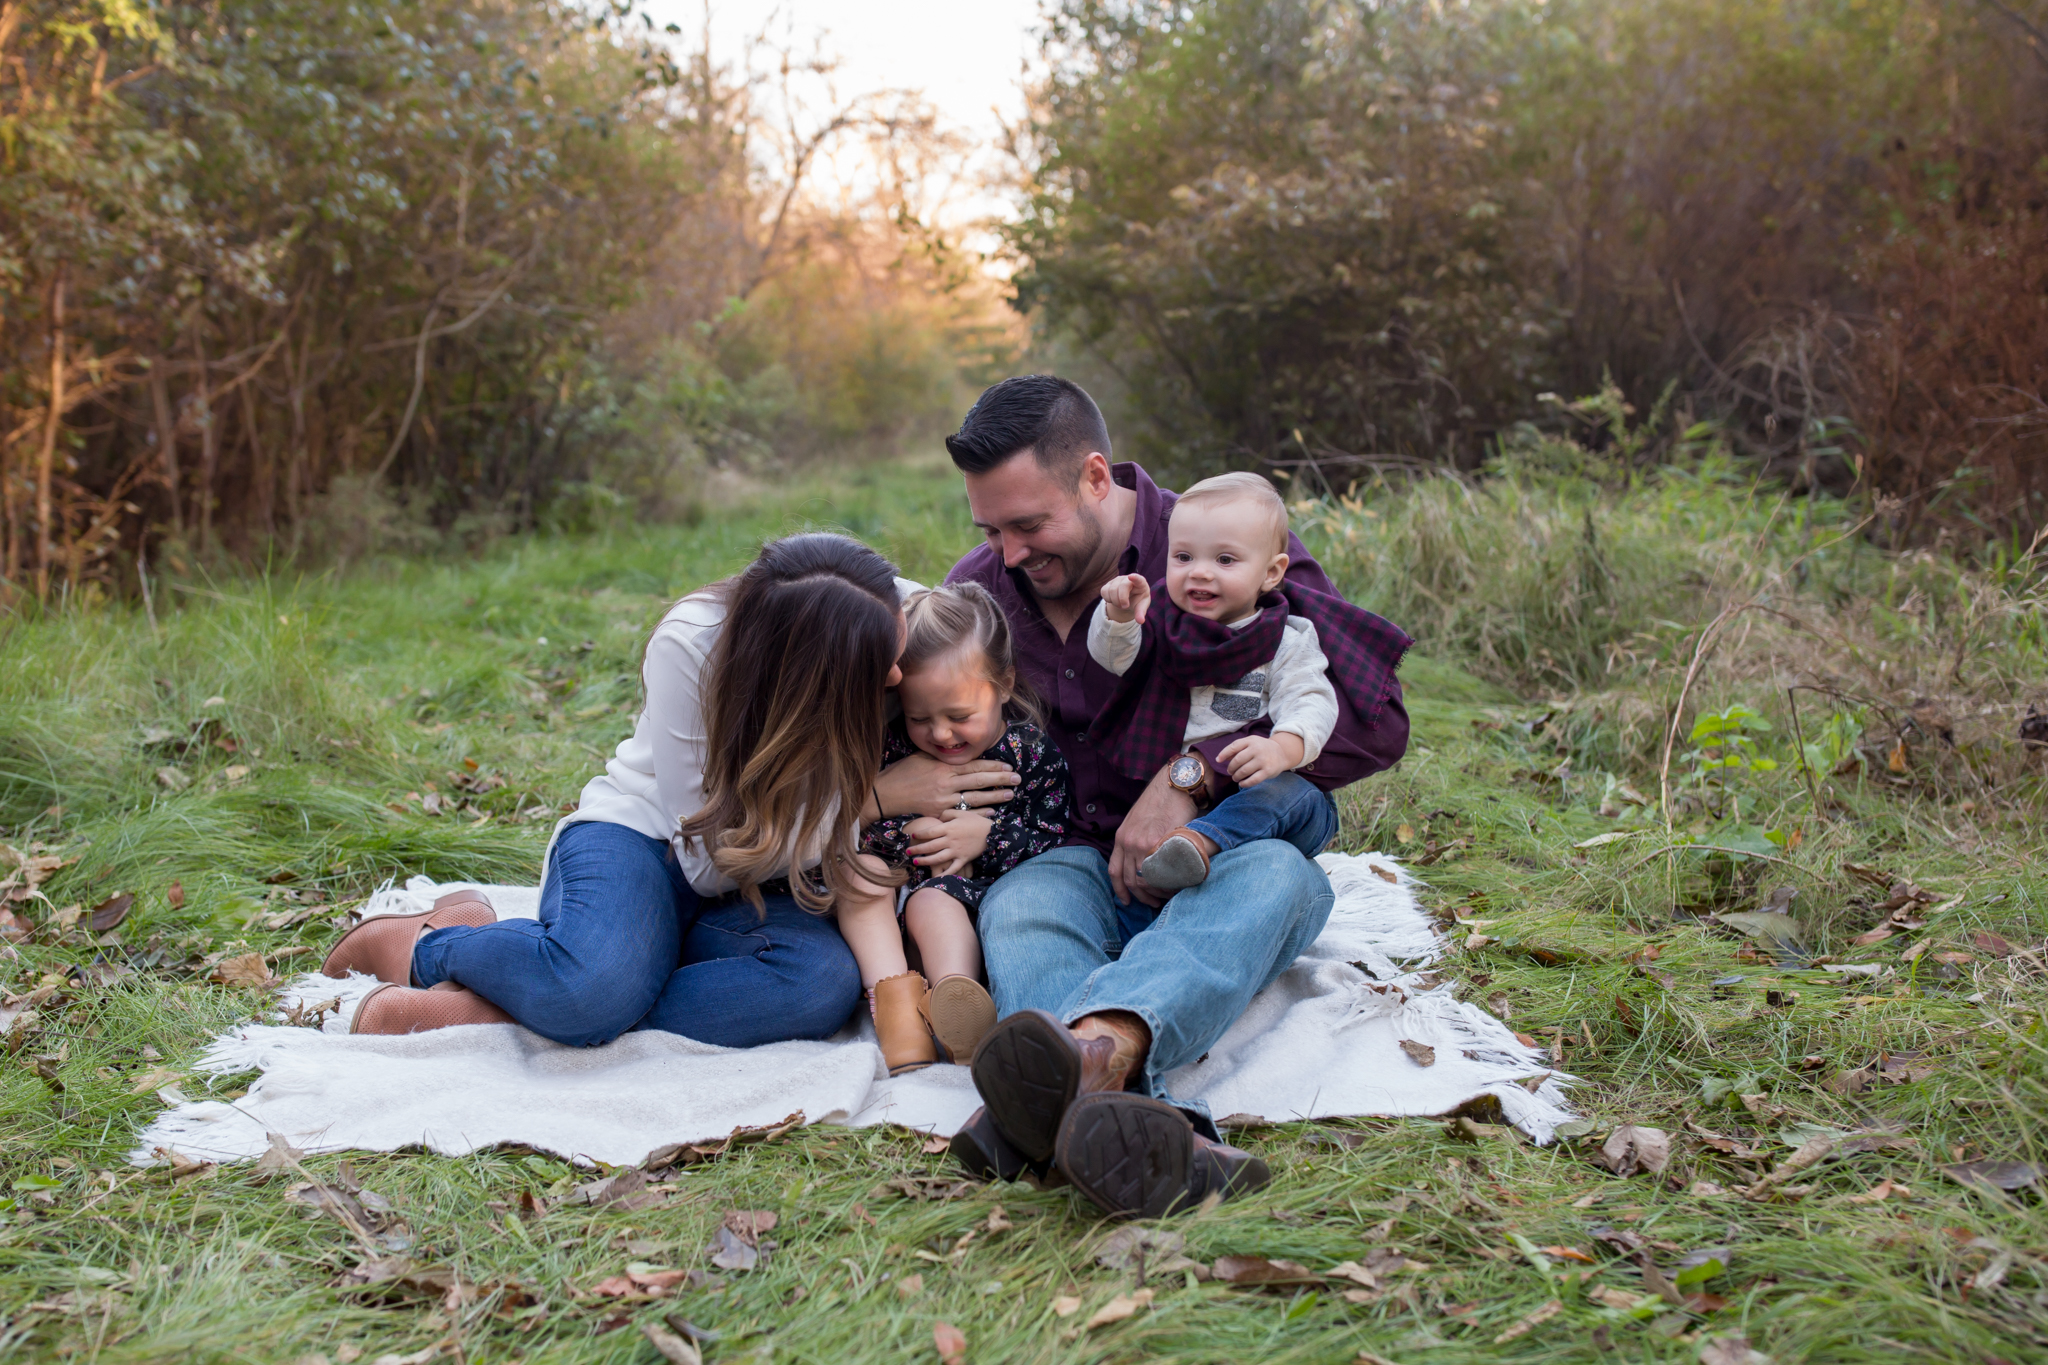 Hailey Family Fall Session, 2 kinds, family poses with young kids, Cara Peterson Photography Rockford IL-4.jpg